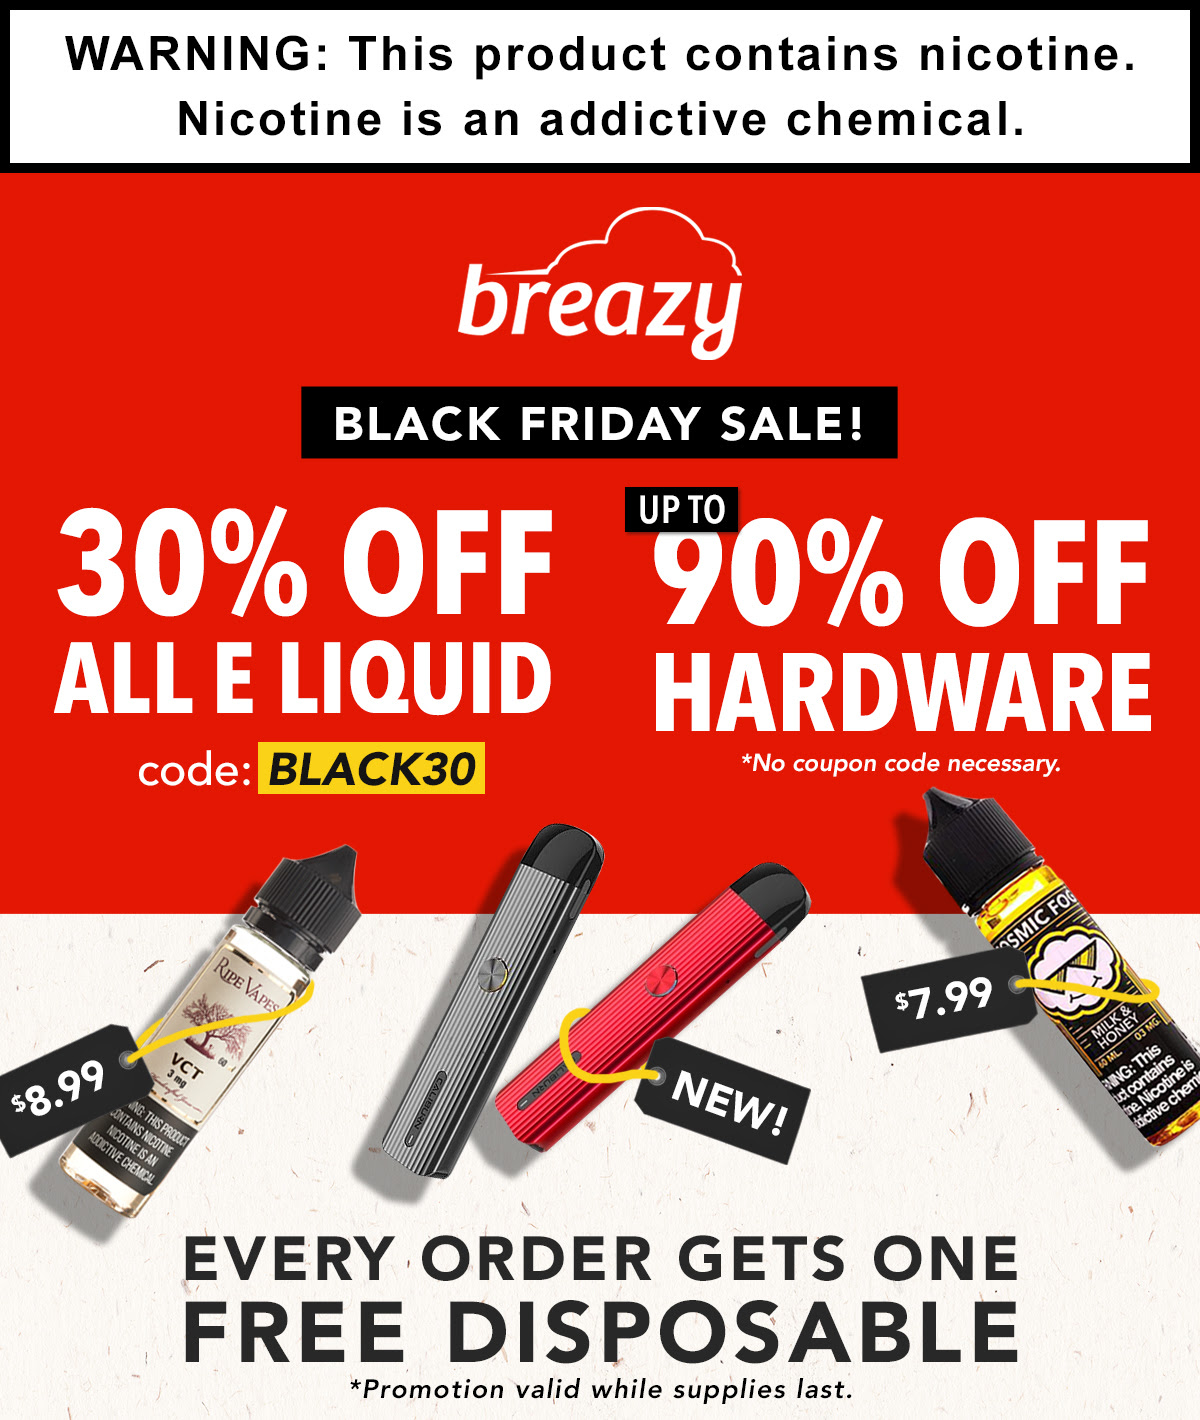 Black Friday Sale! 30% Off All E Liquid with code: BLACK30 + Up To 90% Off Hardware